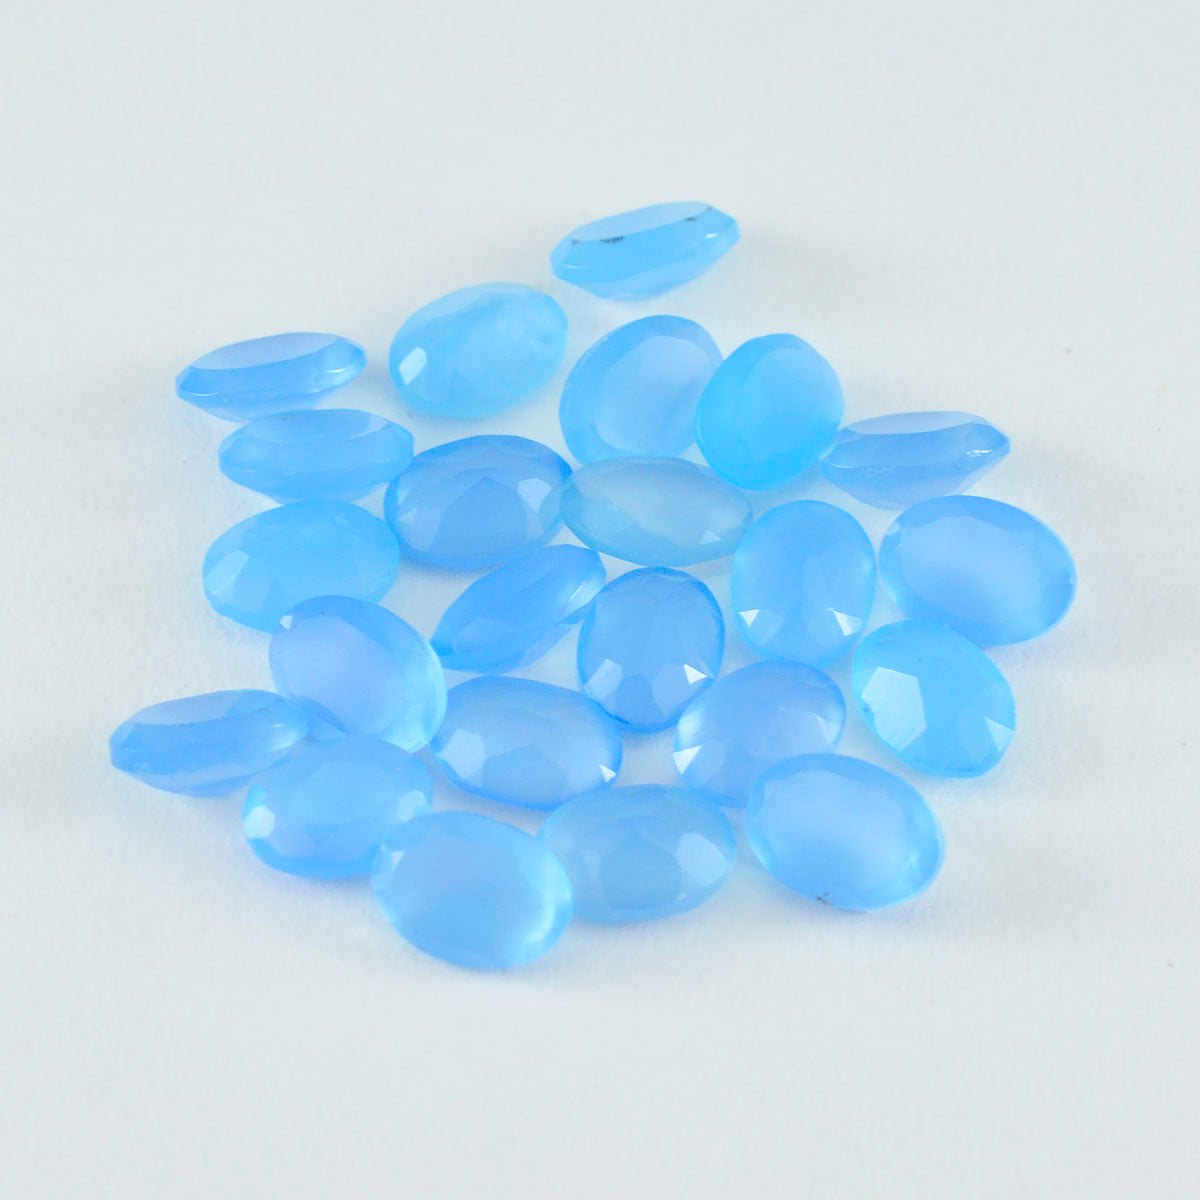 Riyogems 1PC Natural Blue Chalcedony Faceted 5x7 mm Oval Shape pretty Quality Loose Gems